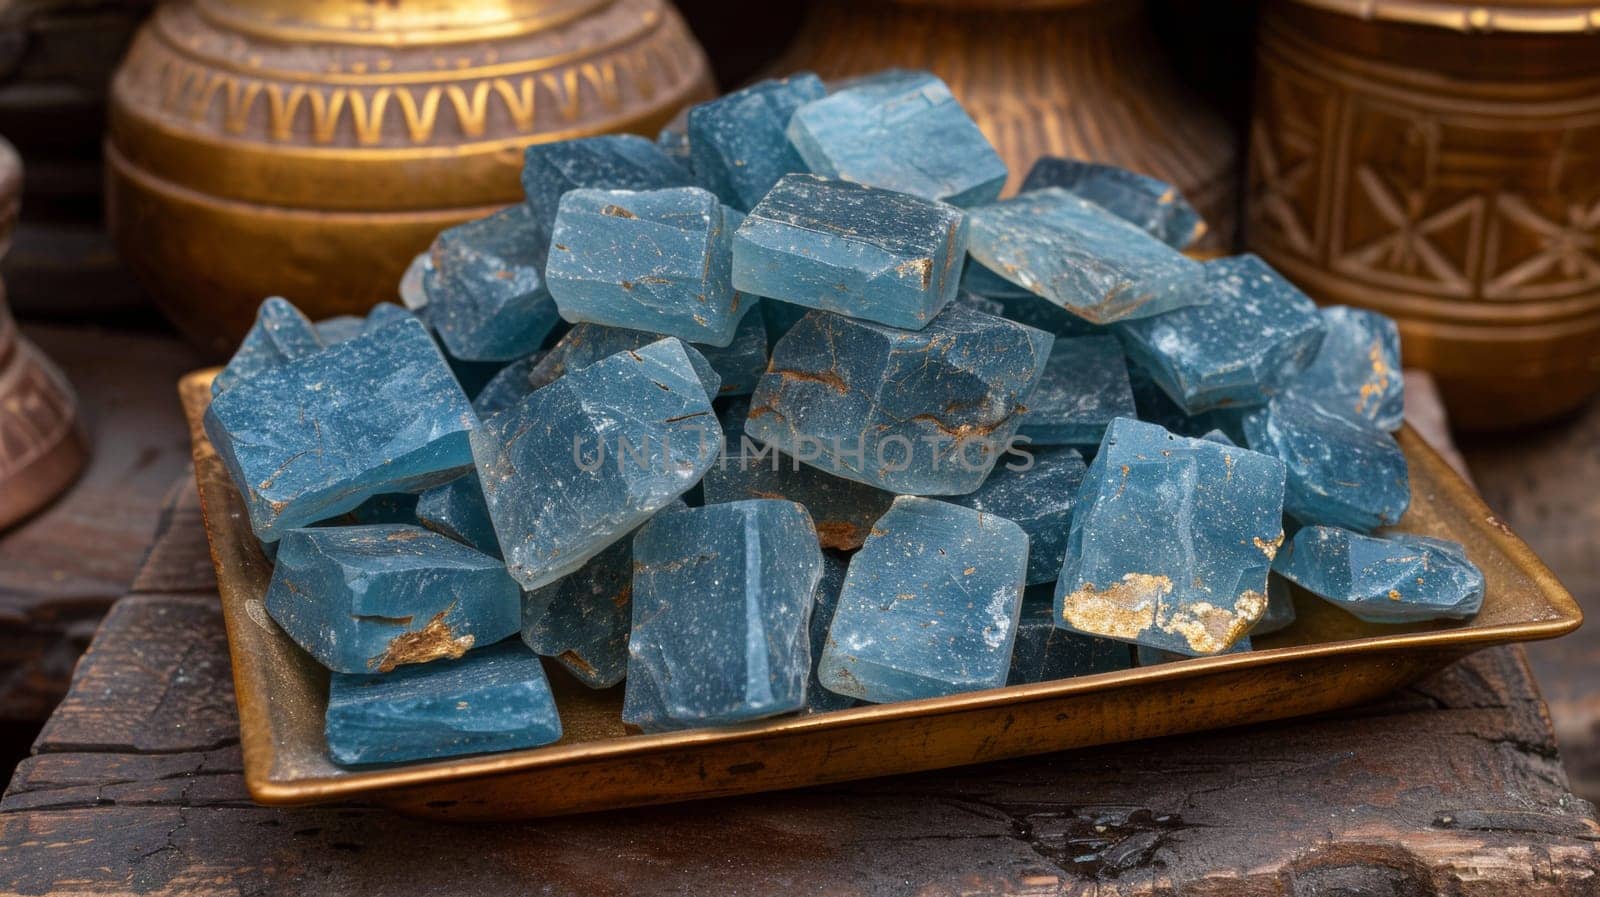 A plate of blue stones sitting on top of a wooden table